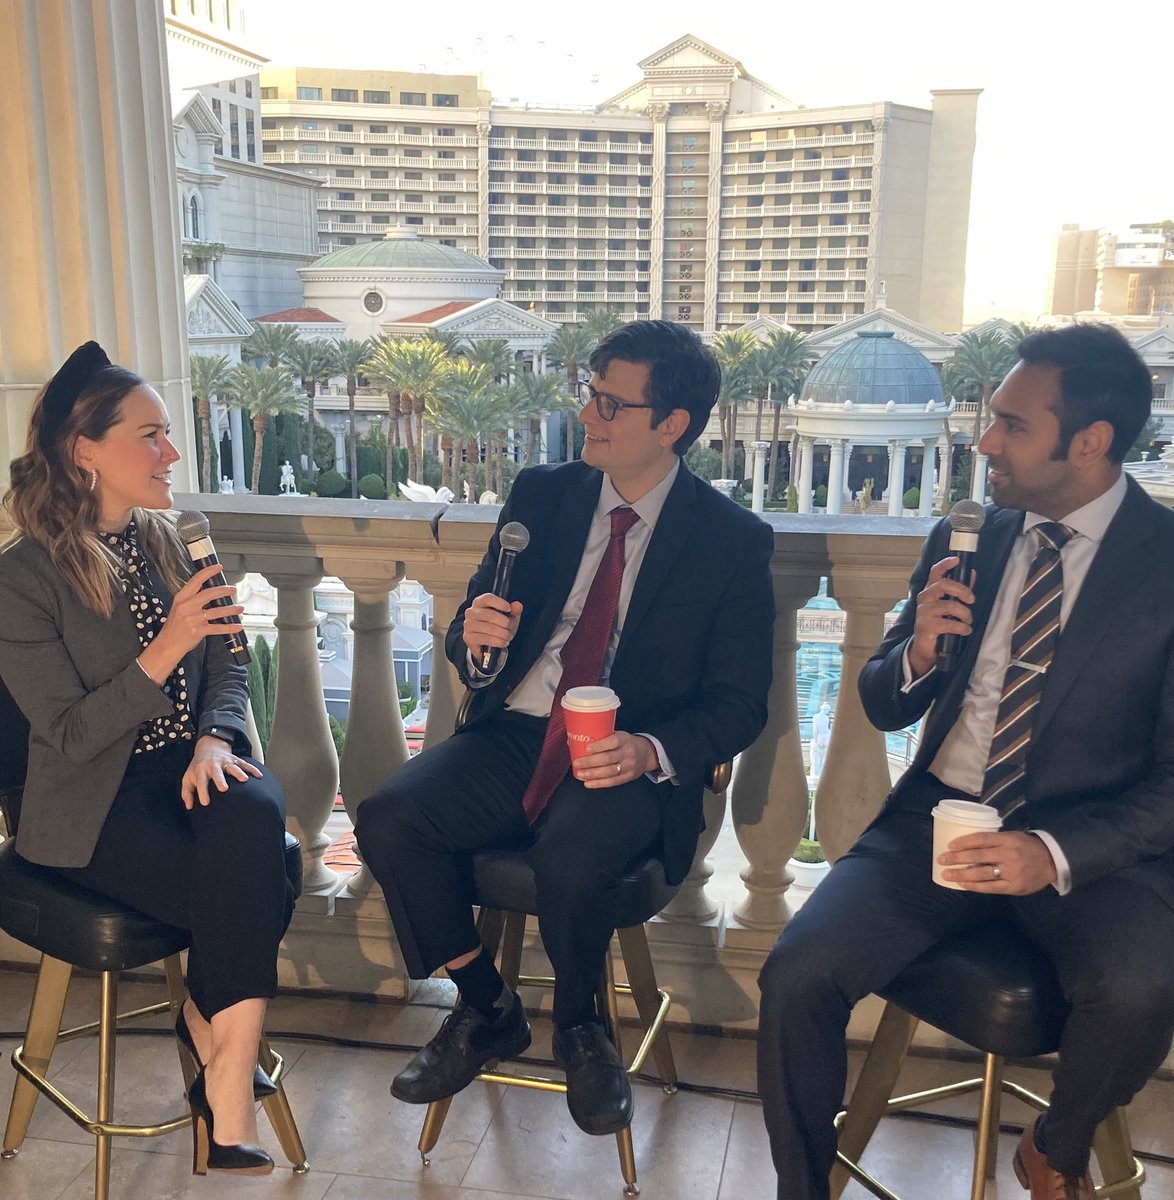 💥We are #LiveFromLasVegas!!💥 Was a blast kicking off #AANFC live with @j_graffradford and @vijaykramanan from @CaesarsPalace Las Vegas.🎤 so much awesome content to look forward to today!